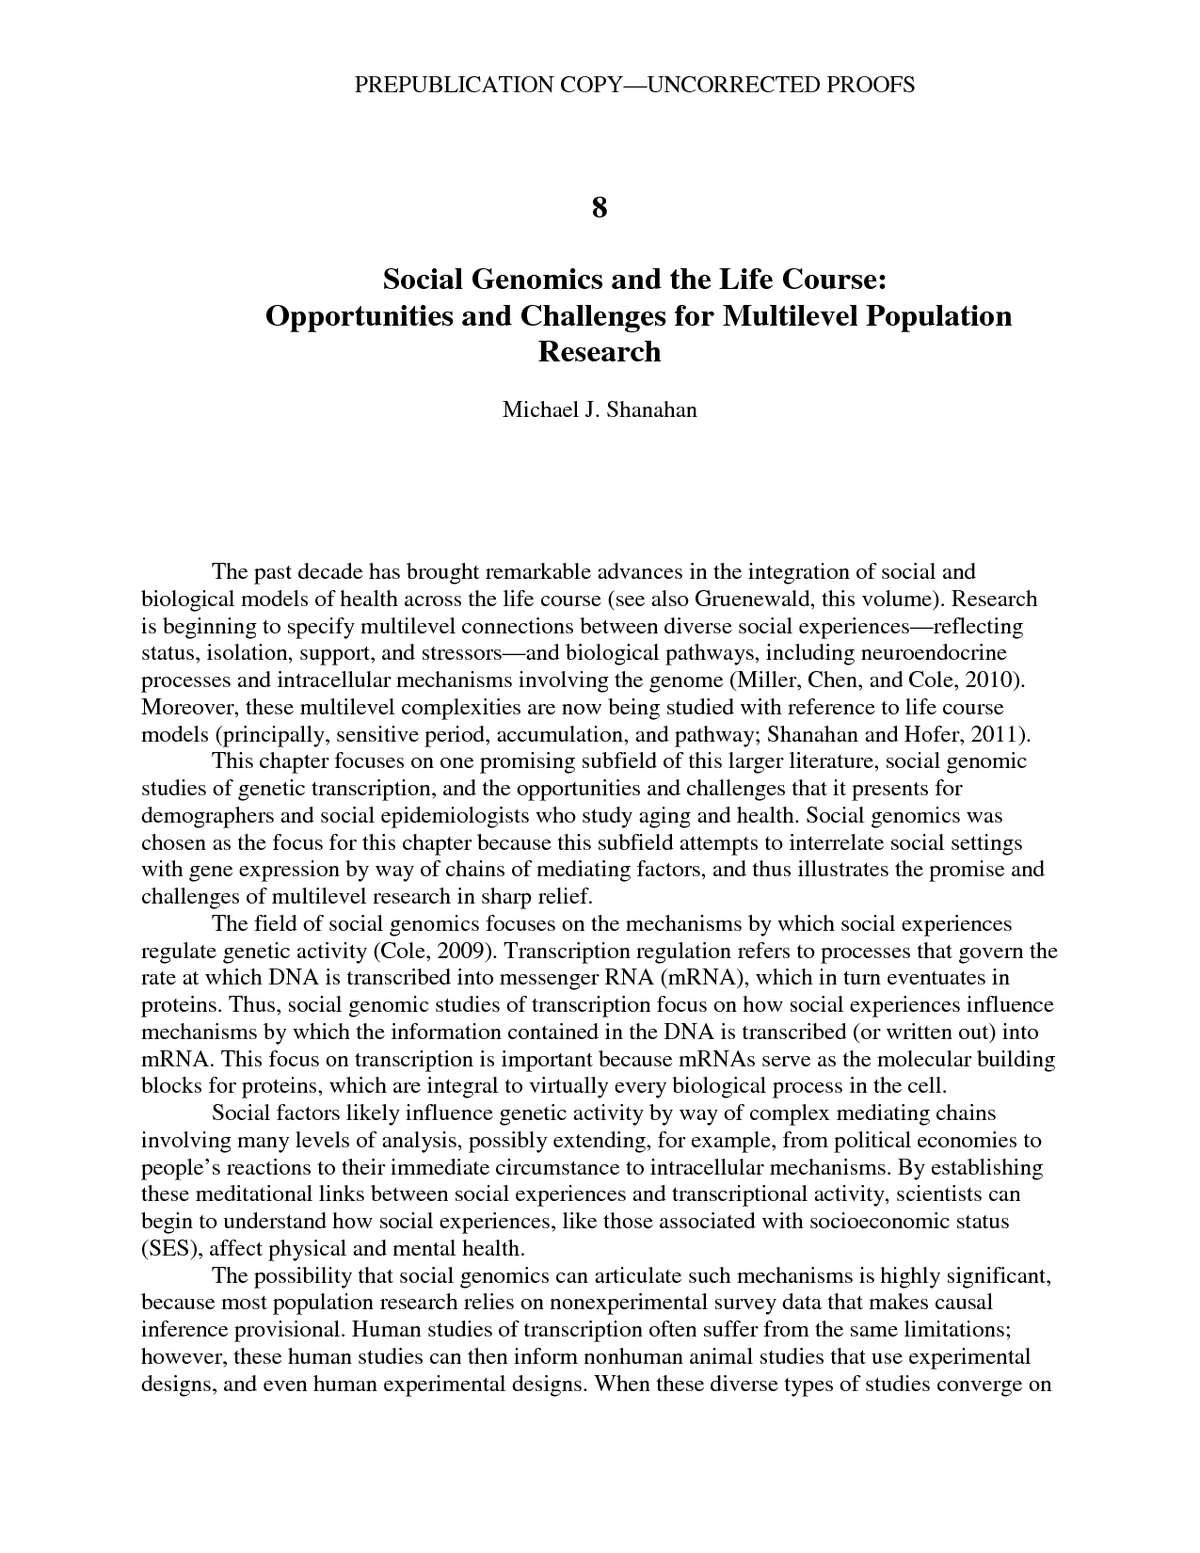 25 Social Genomics and the Life Course: Opportunities and